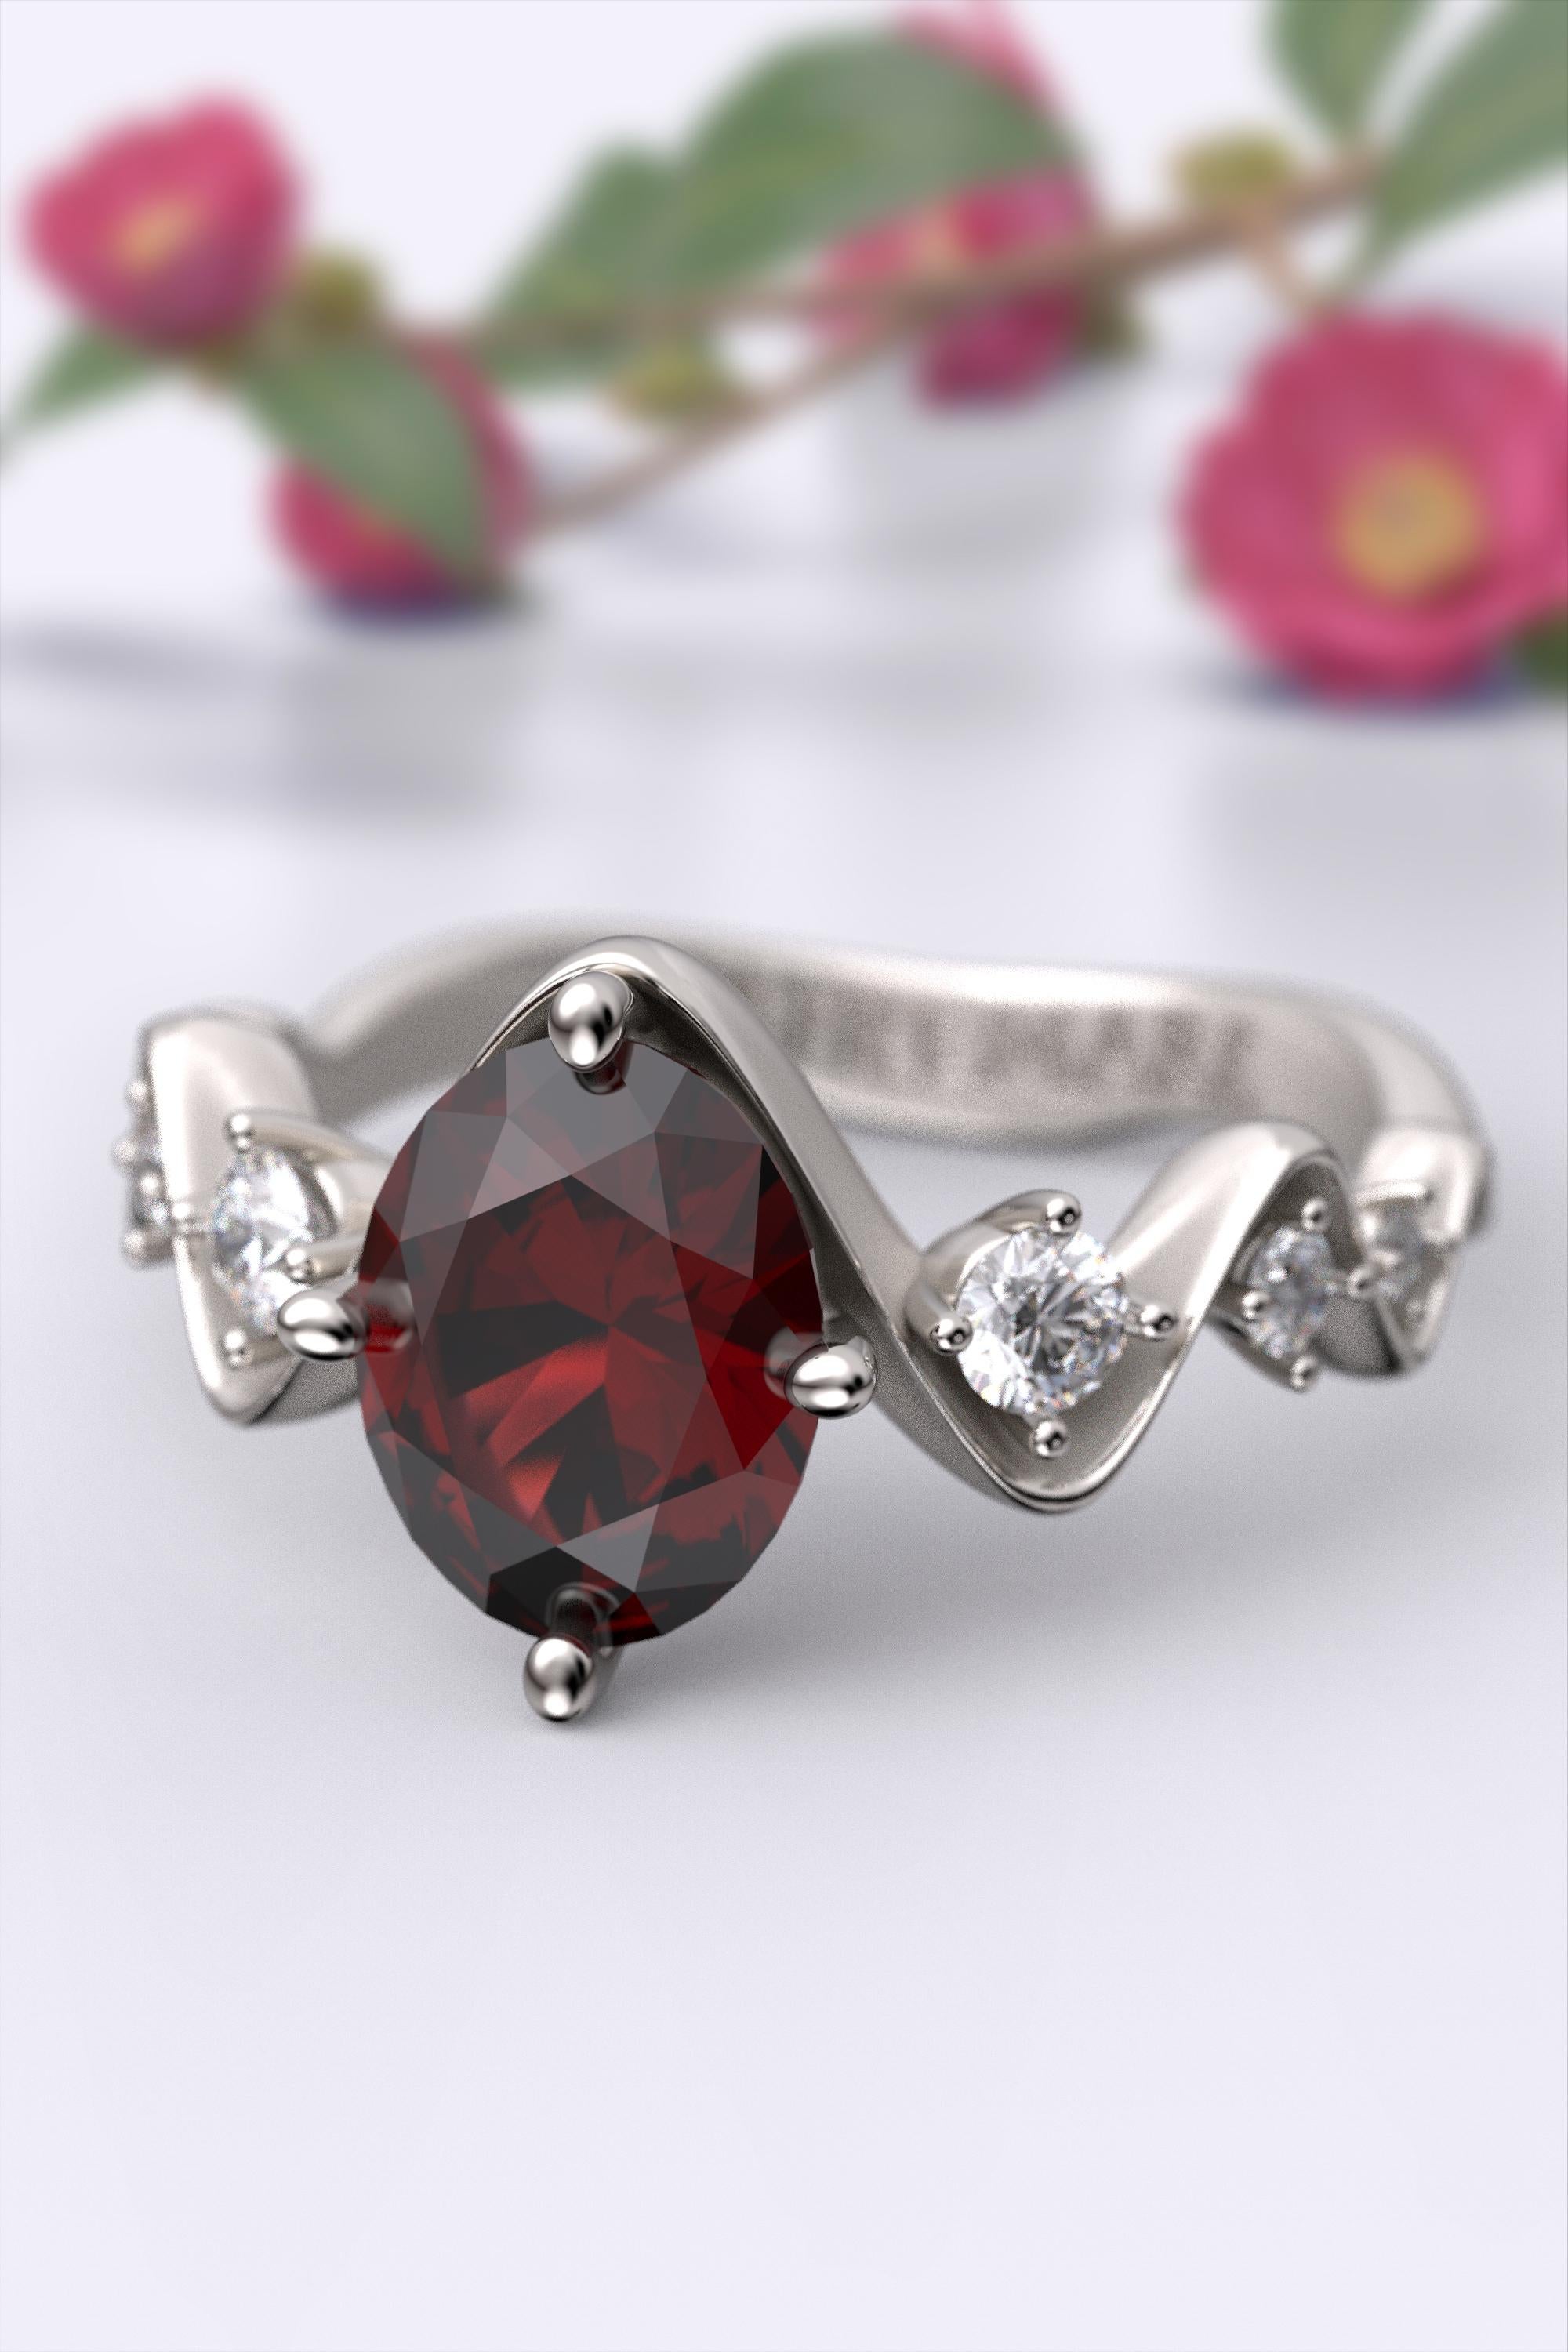 For Sale:  Garnet and Diamonds Engagement Ring Made in Italy by Oltremare Gioielli 18k Gold 13